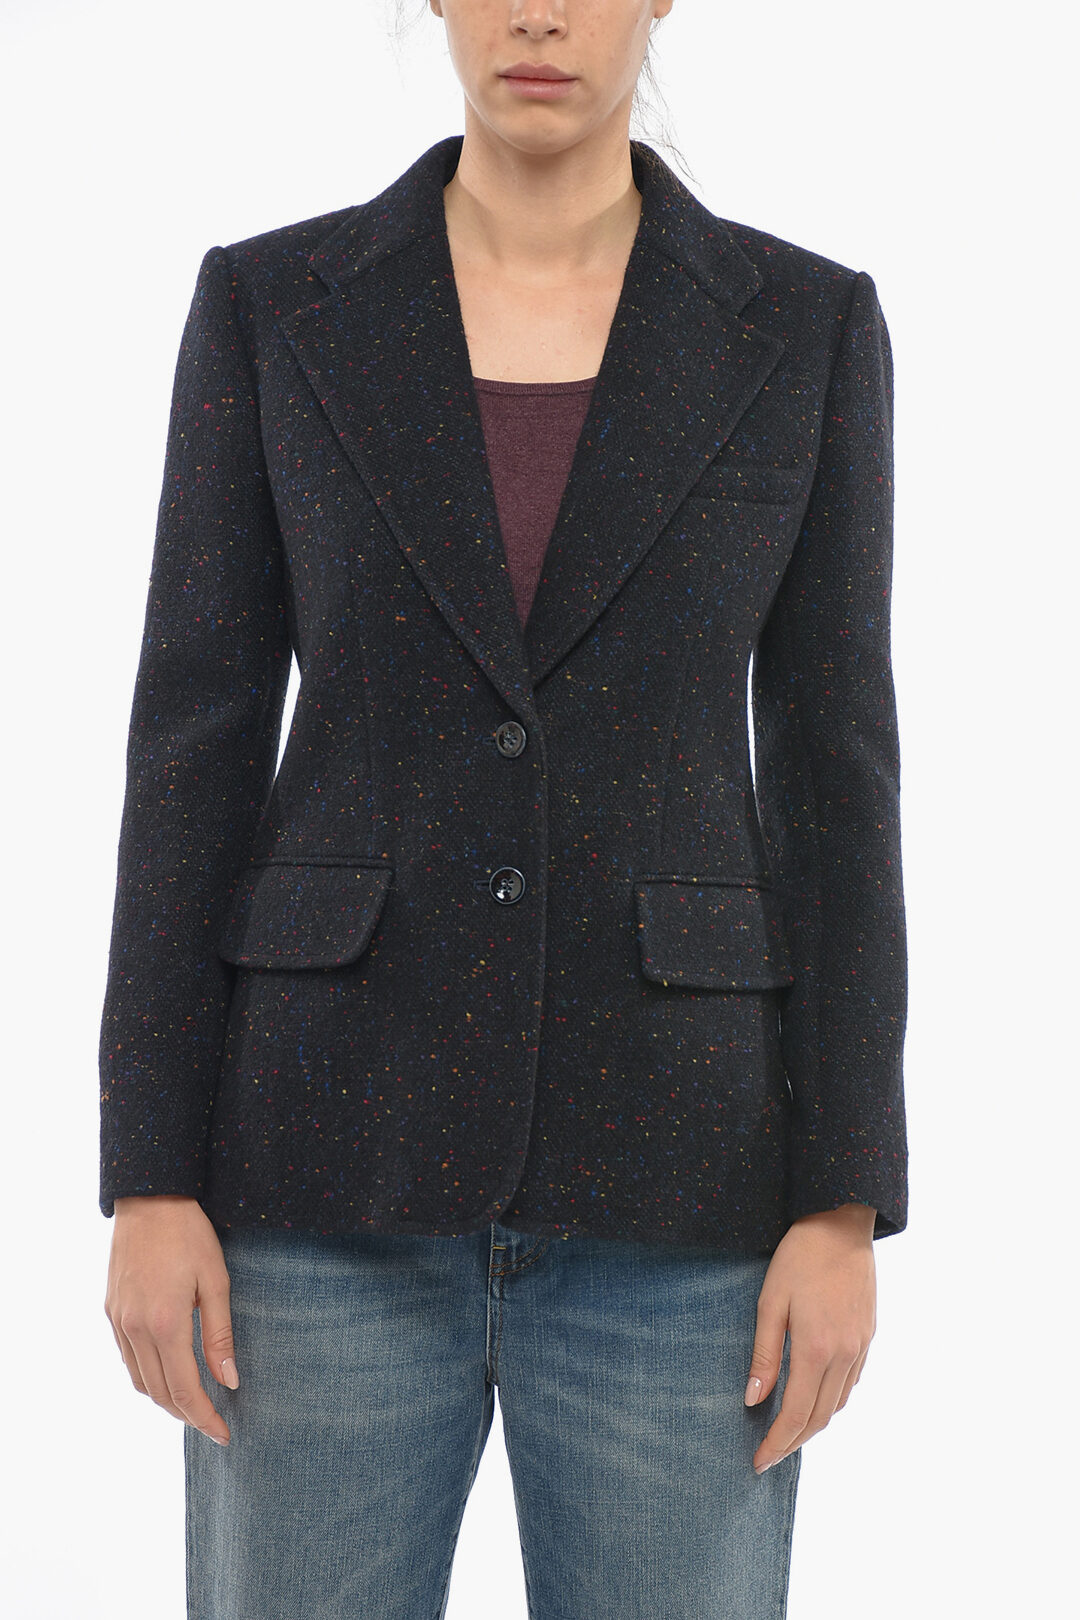 Alexander McQueen Houndstooth Single Breasted Blazer women - Glamood Outlet